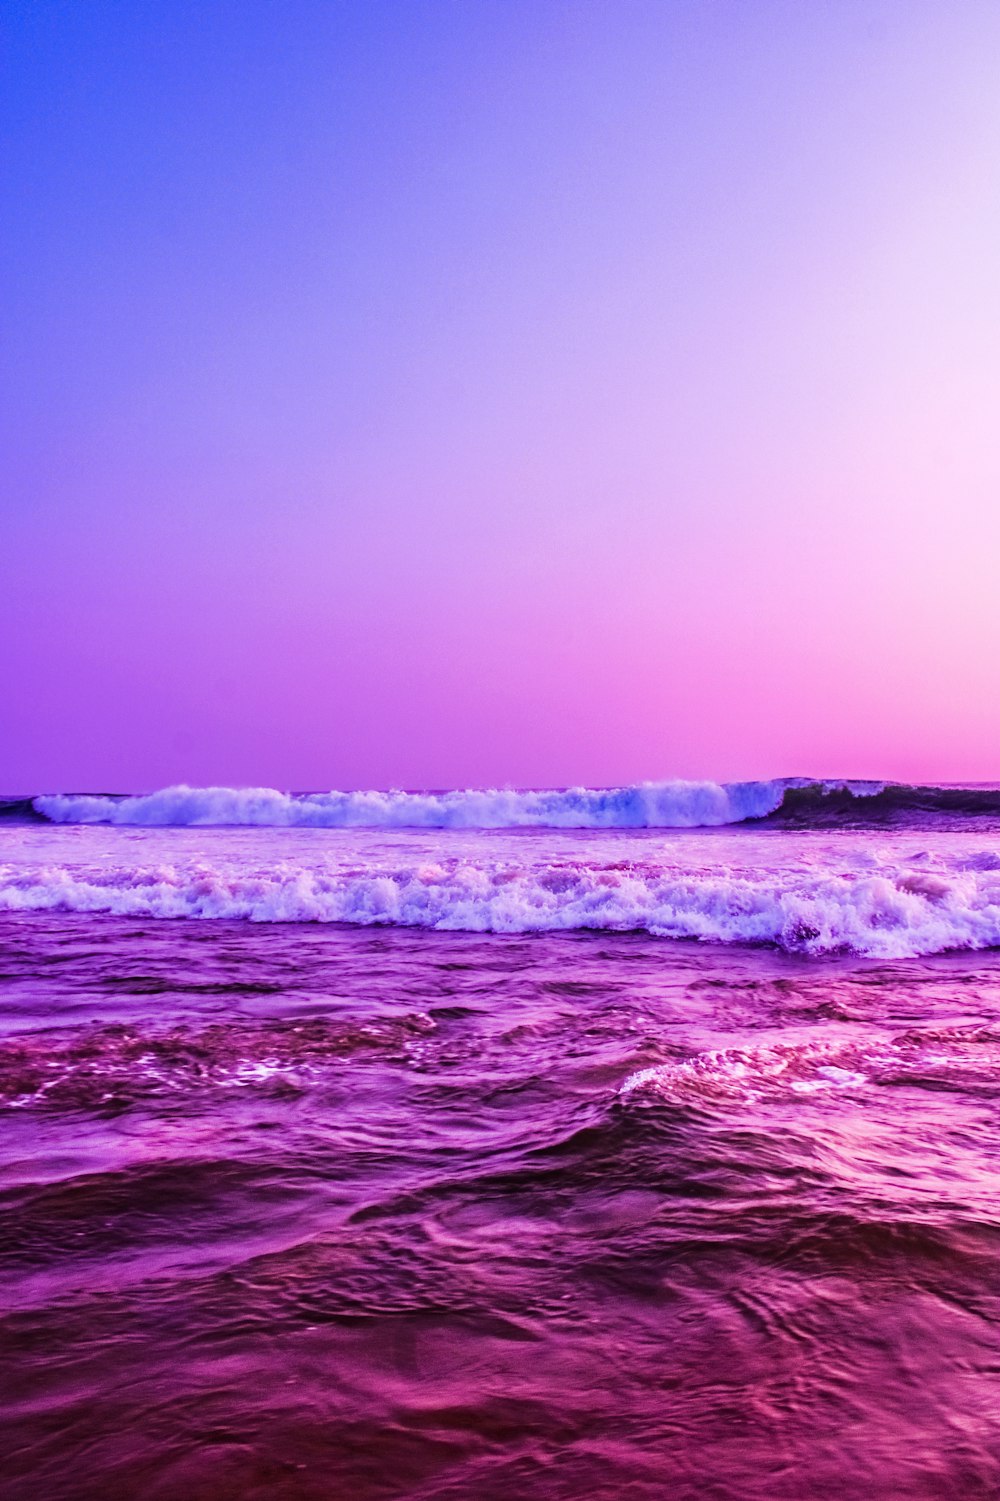 a purple and blue sky over a body of water